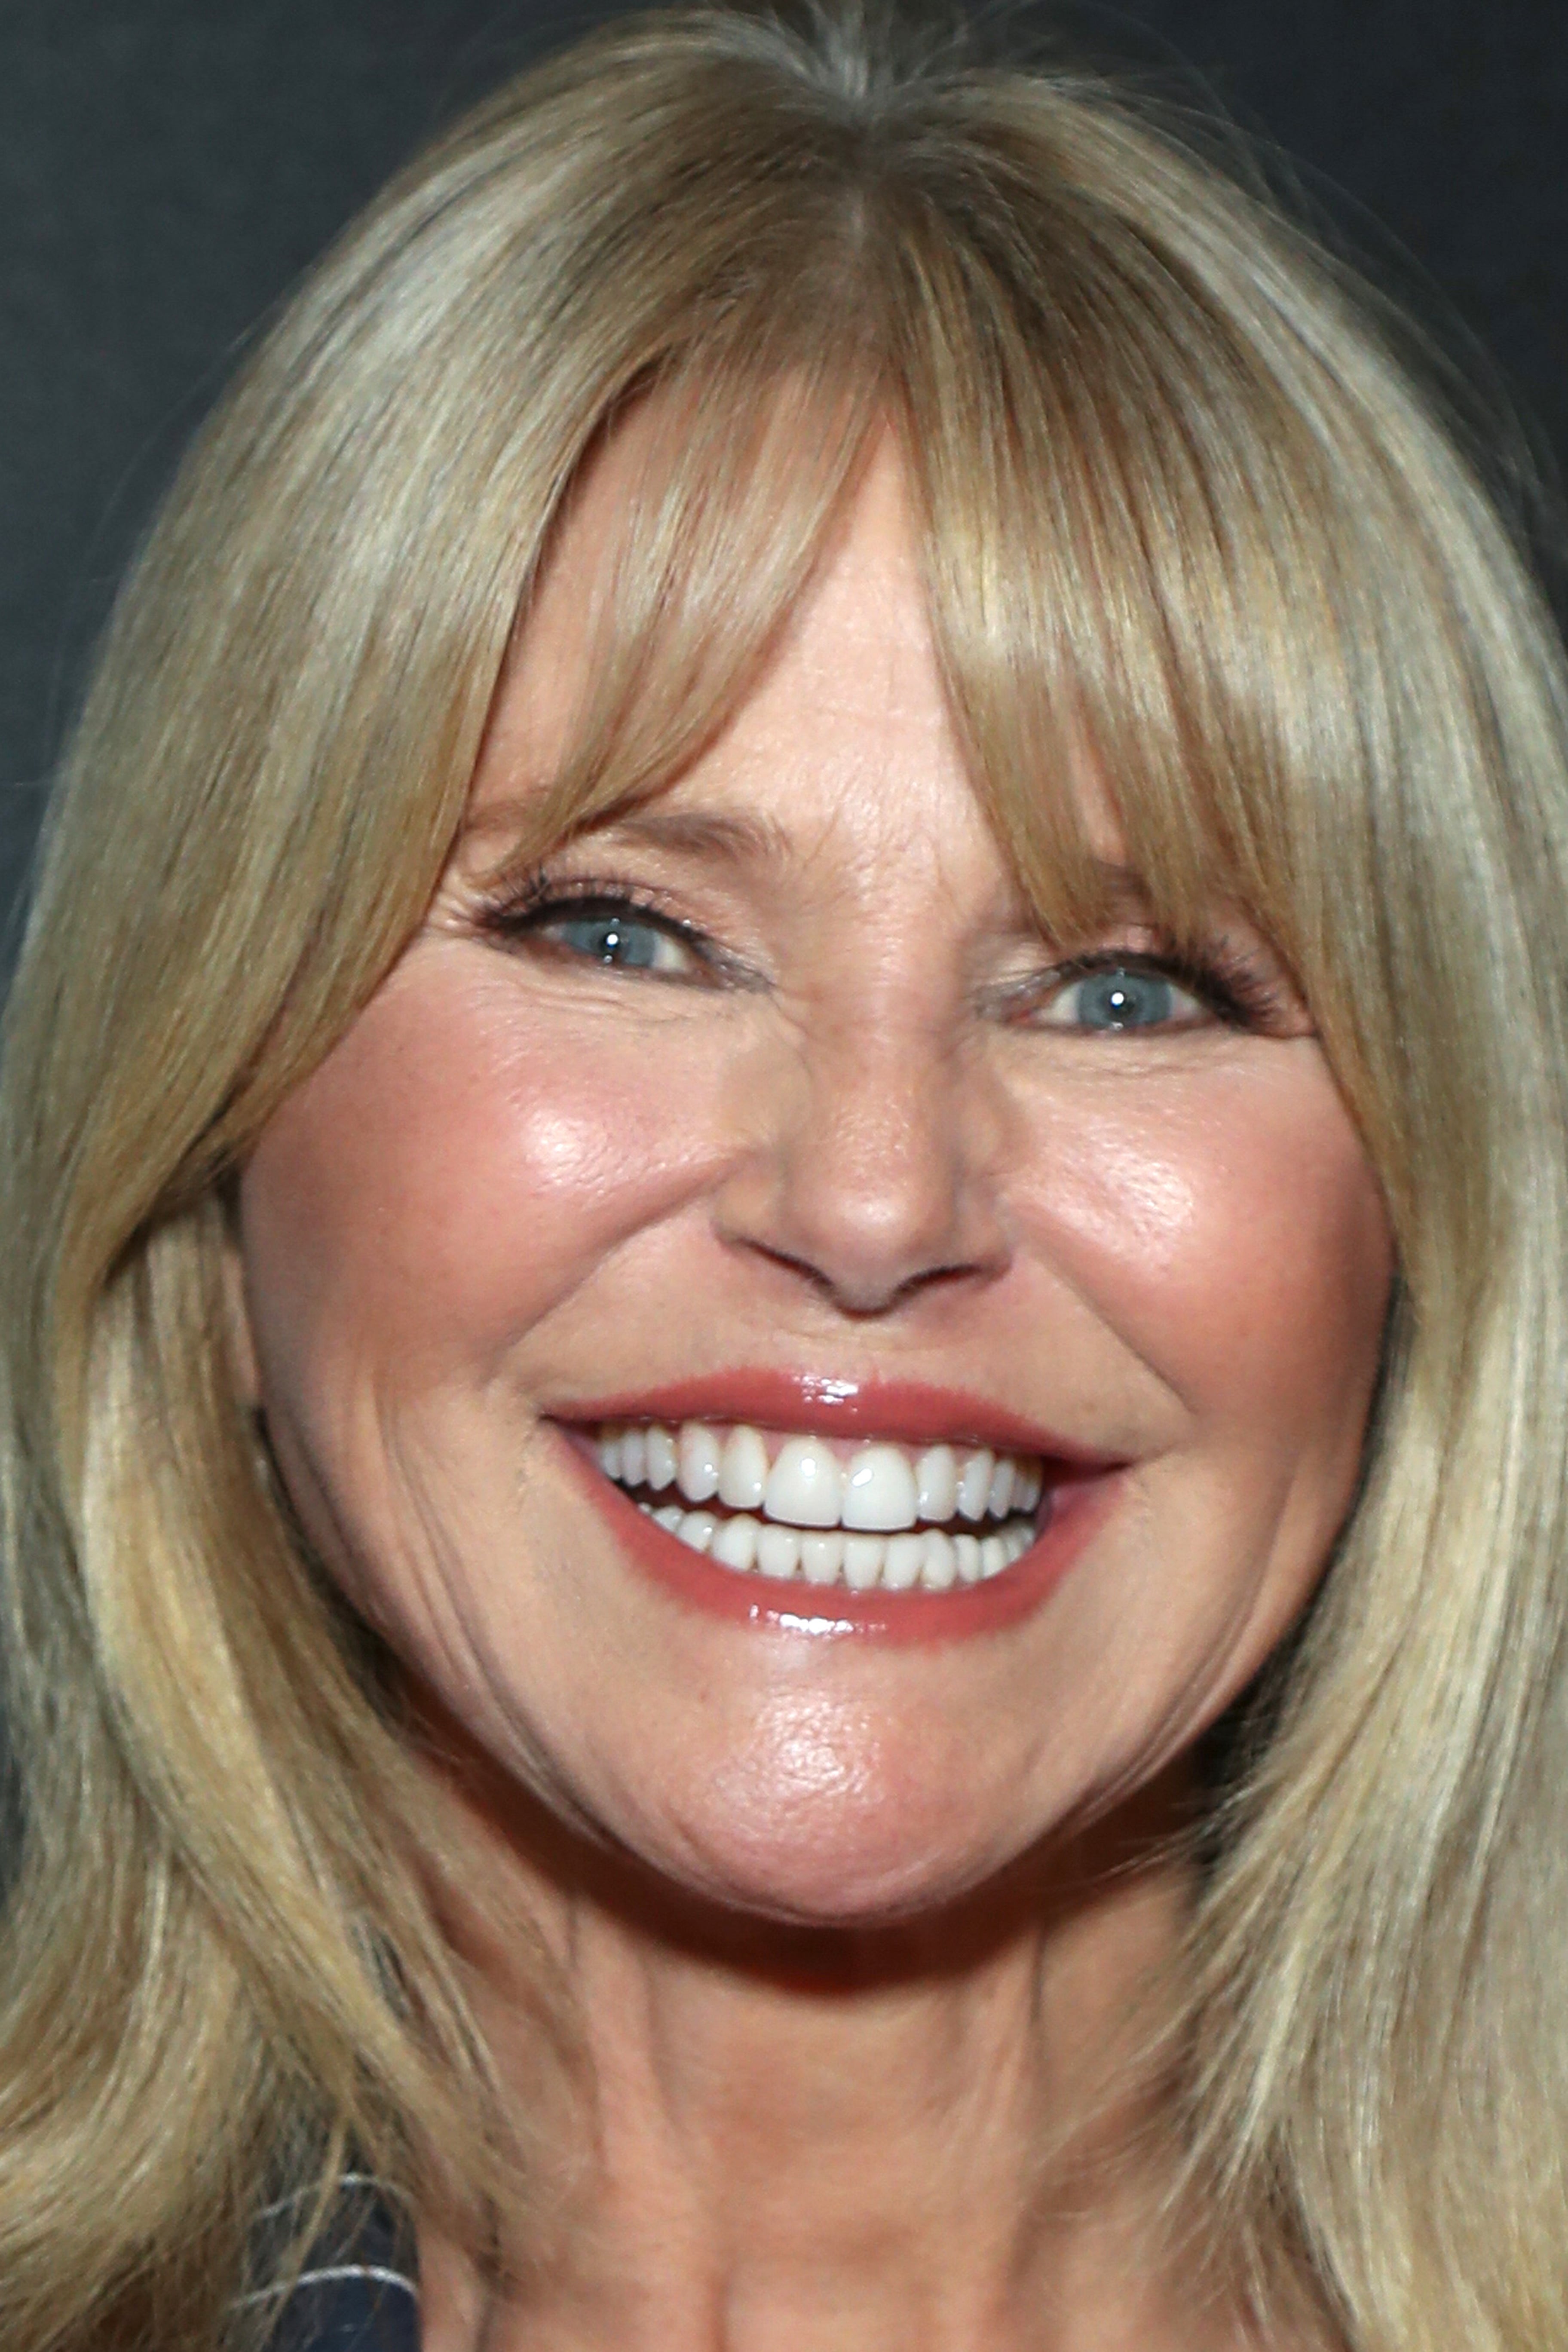 Christie Brinkley Claps Back at the “Wrinkle Brigade” For Criticizing Her Unfiltered Selfie